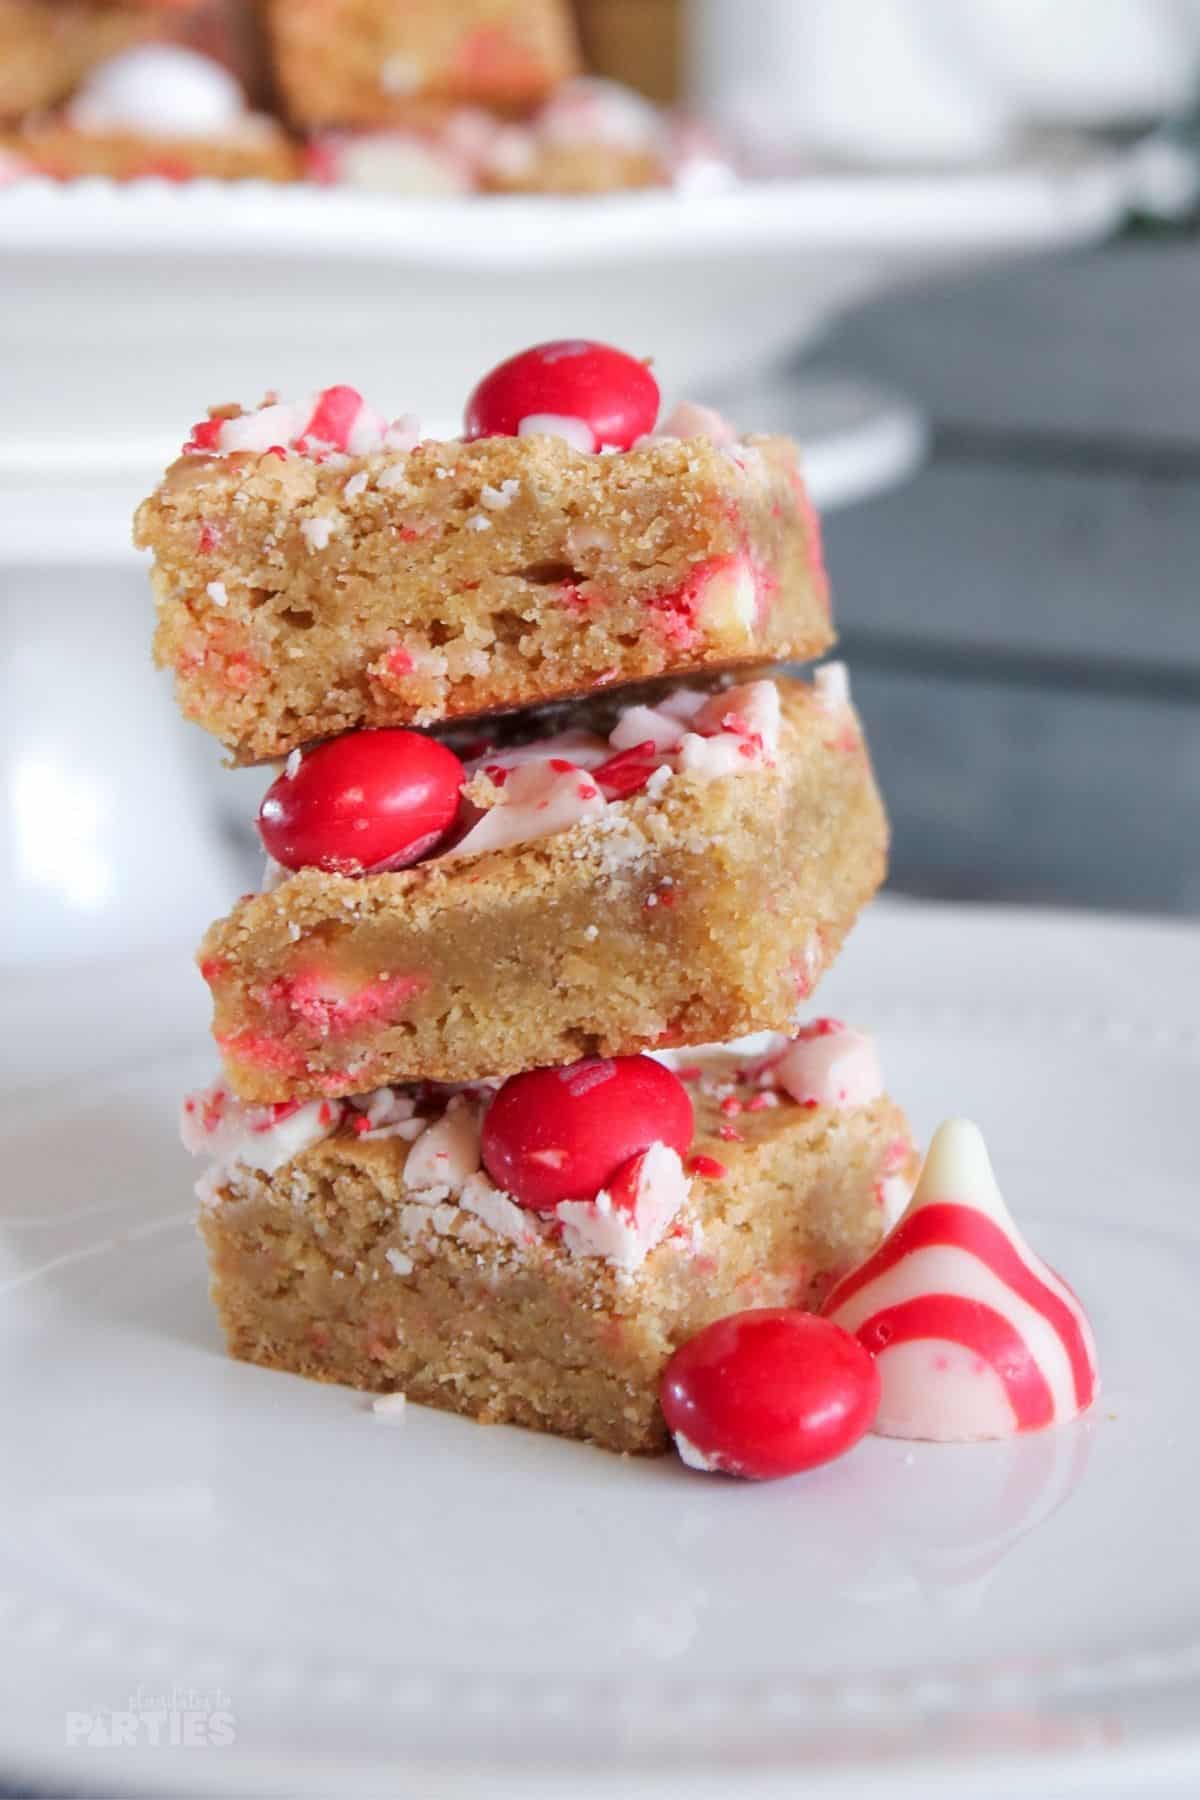 White chocolate blondies with peppermint are the perfect easy recipe to make for the holidays this year. They are a creative take on peppermint desserts for Christmas, but are also a simple way to make desserts for a crowd. Hands down, these are the BEST blondies and bars for the holiday season. #holidays #ChristmasRecipes #candycanerecipes #peppermintdesserts #holidaysweettreats #desserts #bakesale